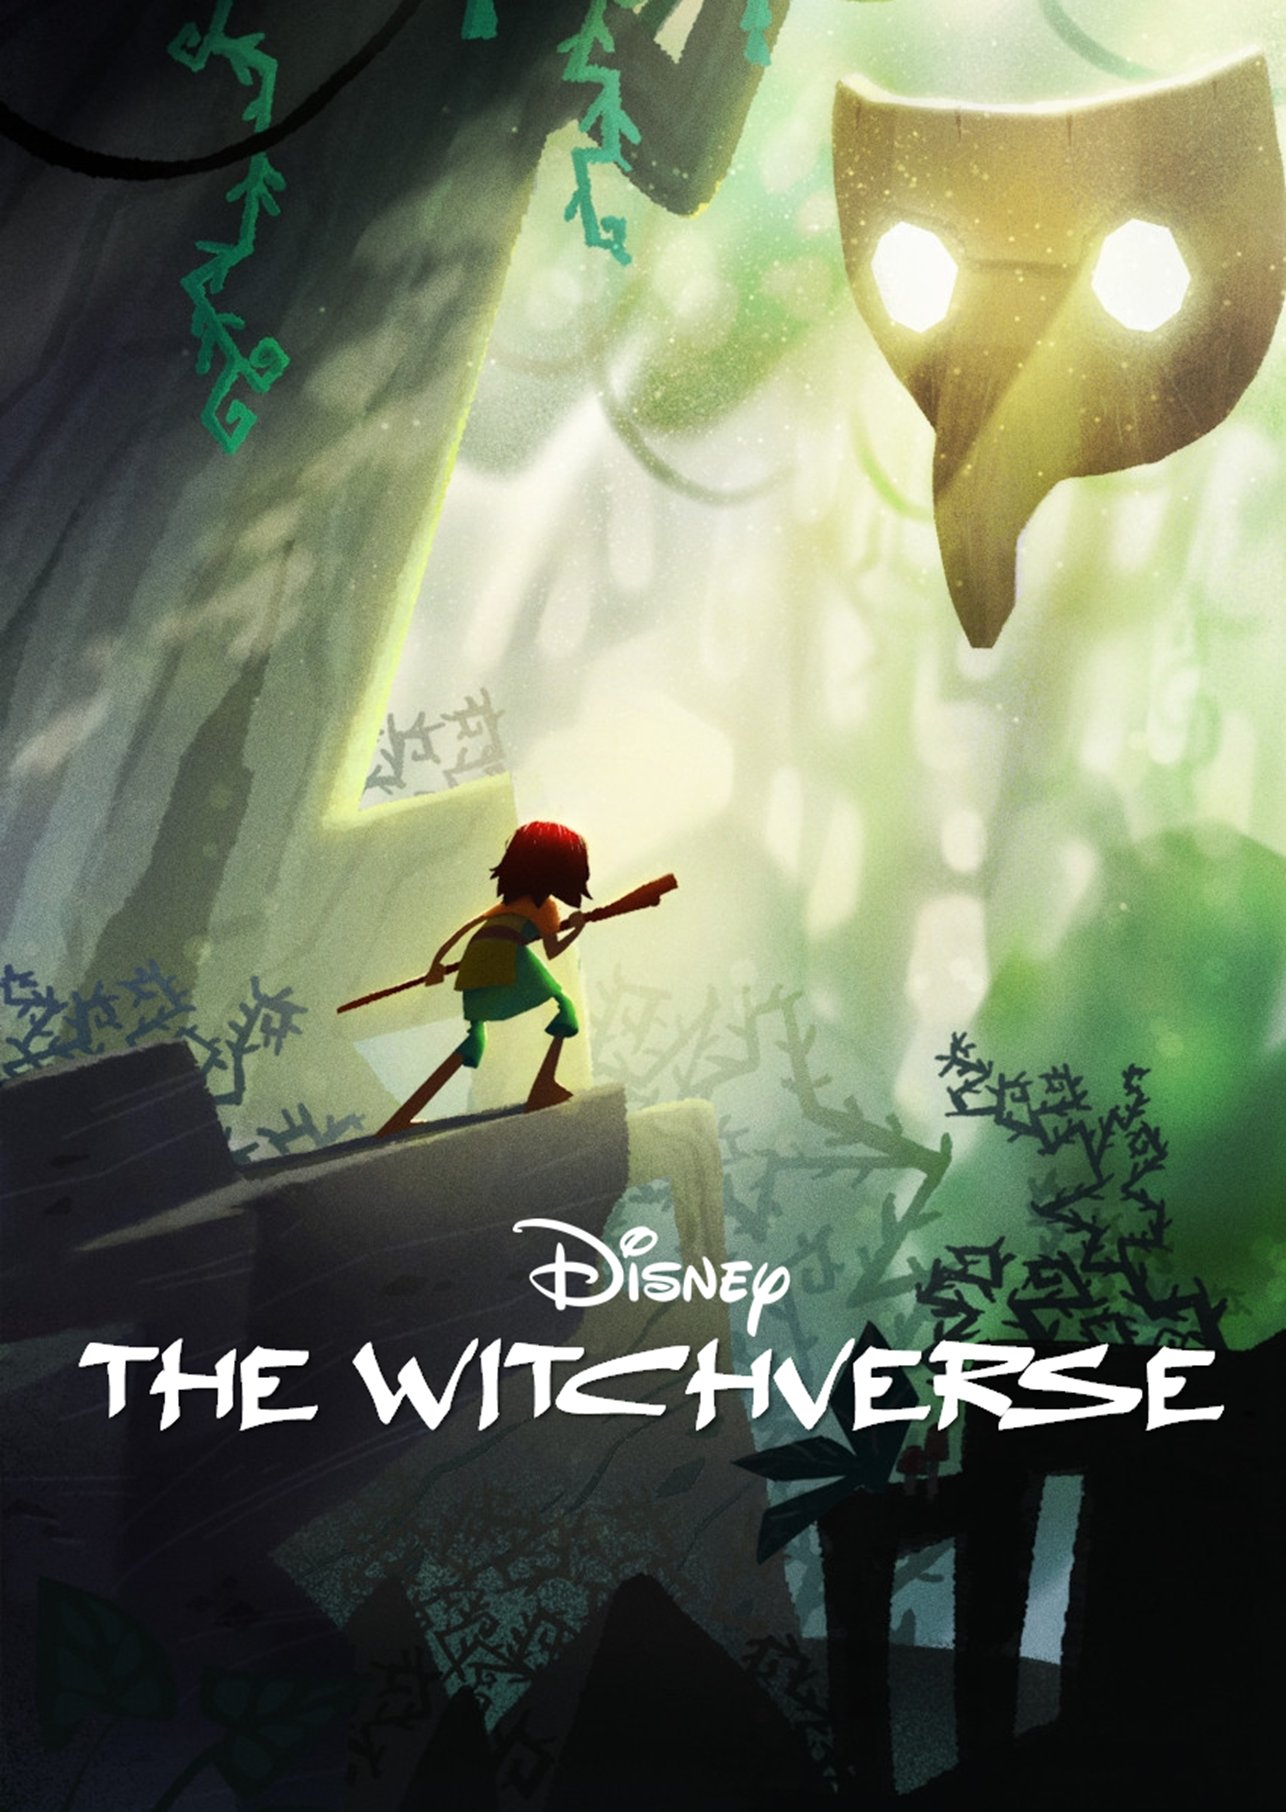 Disney Tv Animation News New Disneytva Series Alert Disneyplus Has Greenlighted Thewitchverse An Animated Anthology Series Based On Baobab S Animated Vr Short Film Baba Yaga Created By Eric Darnell Thewitchverse